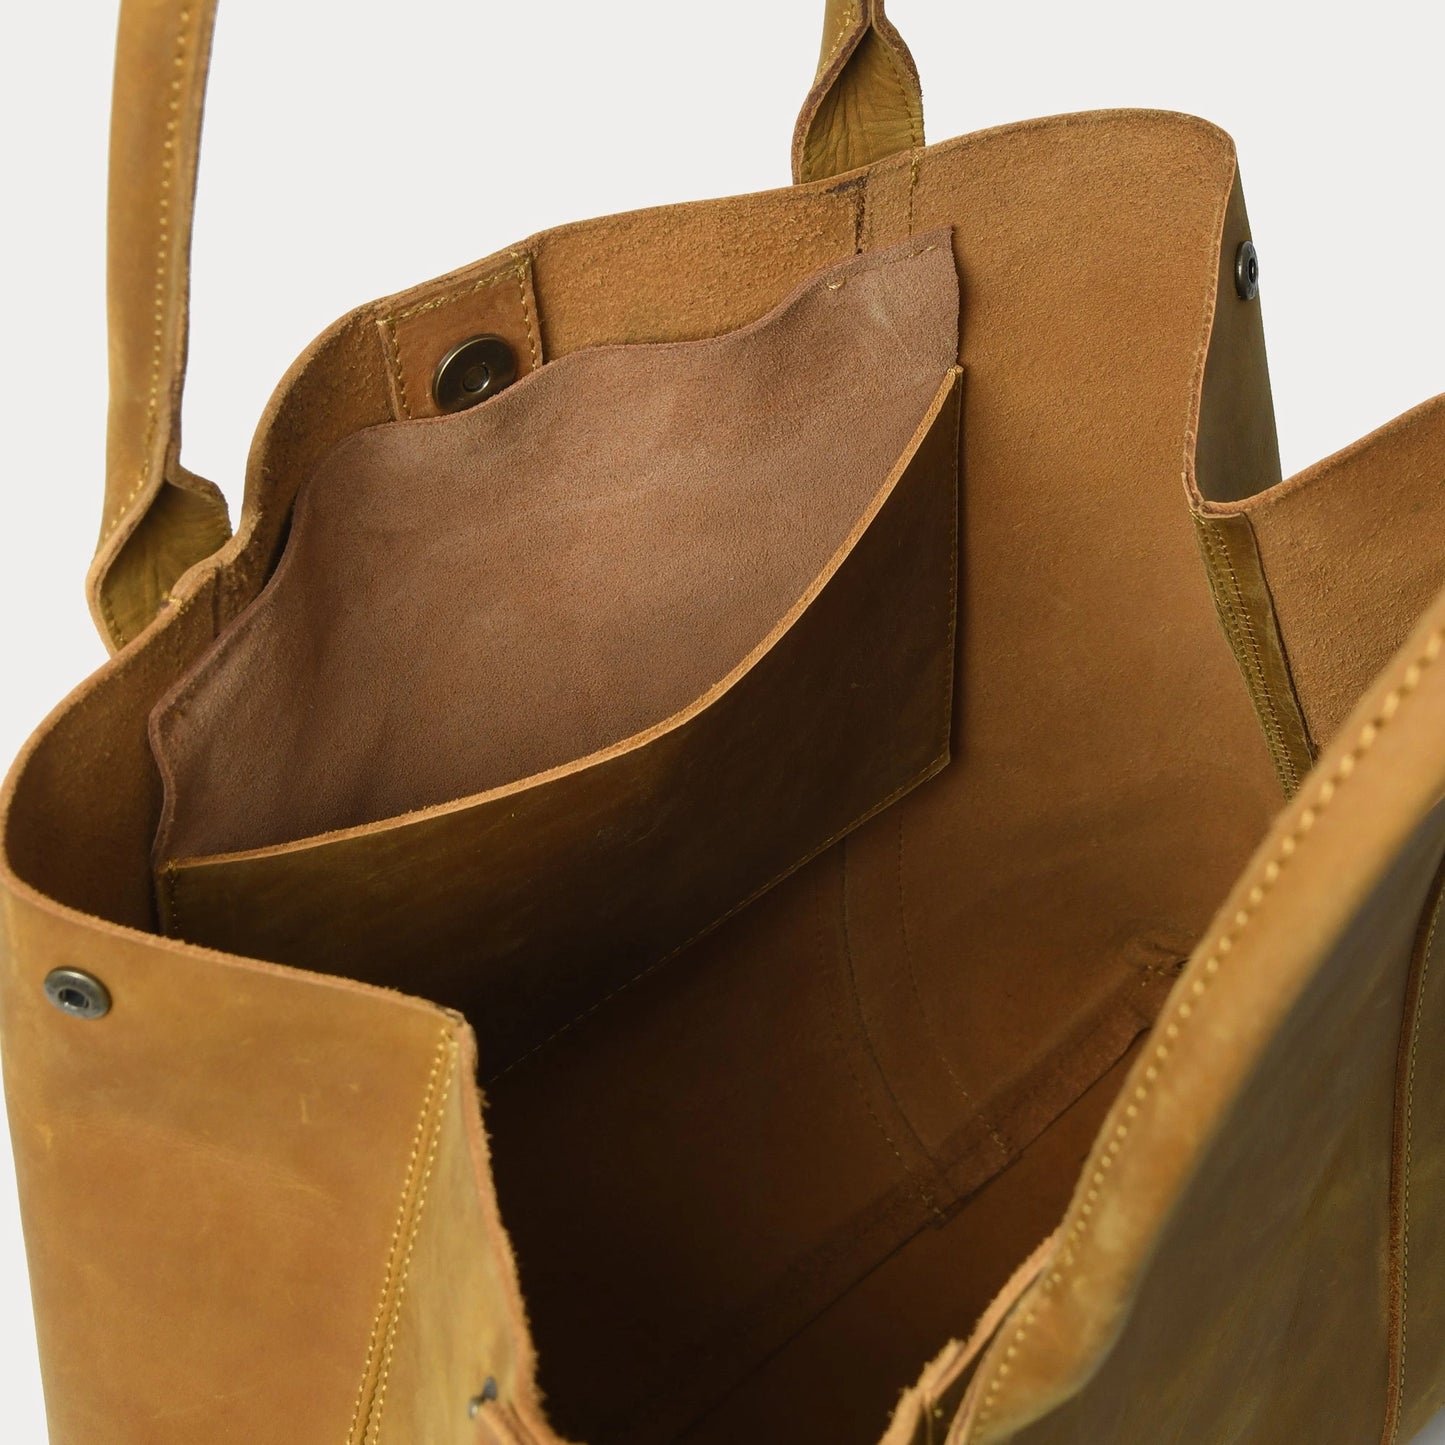 Save 40%! - Shinny Leather Tote in Light Brown by Le Papillon